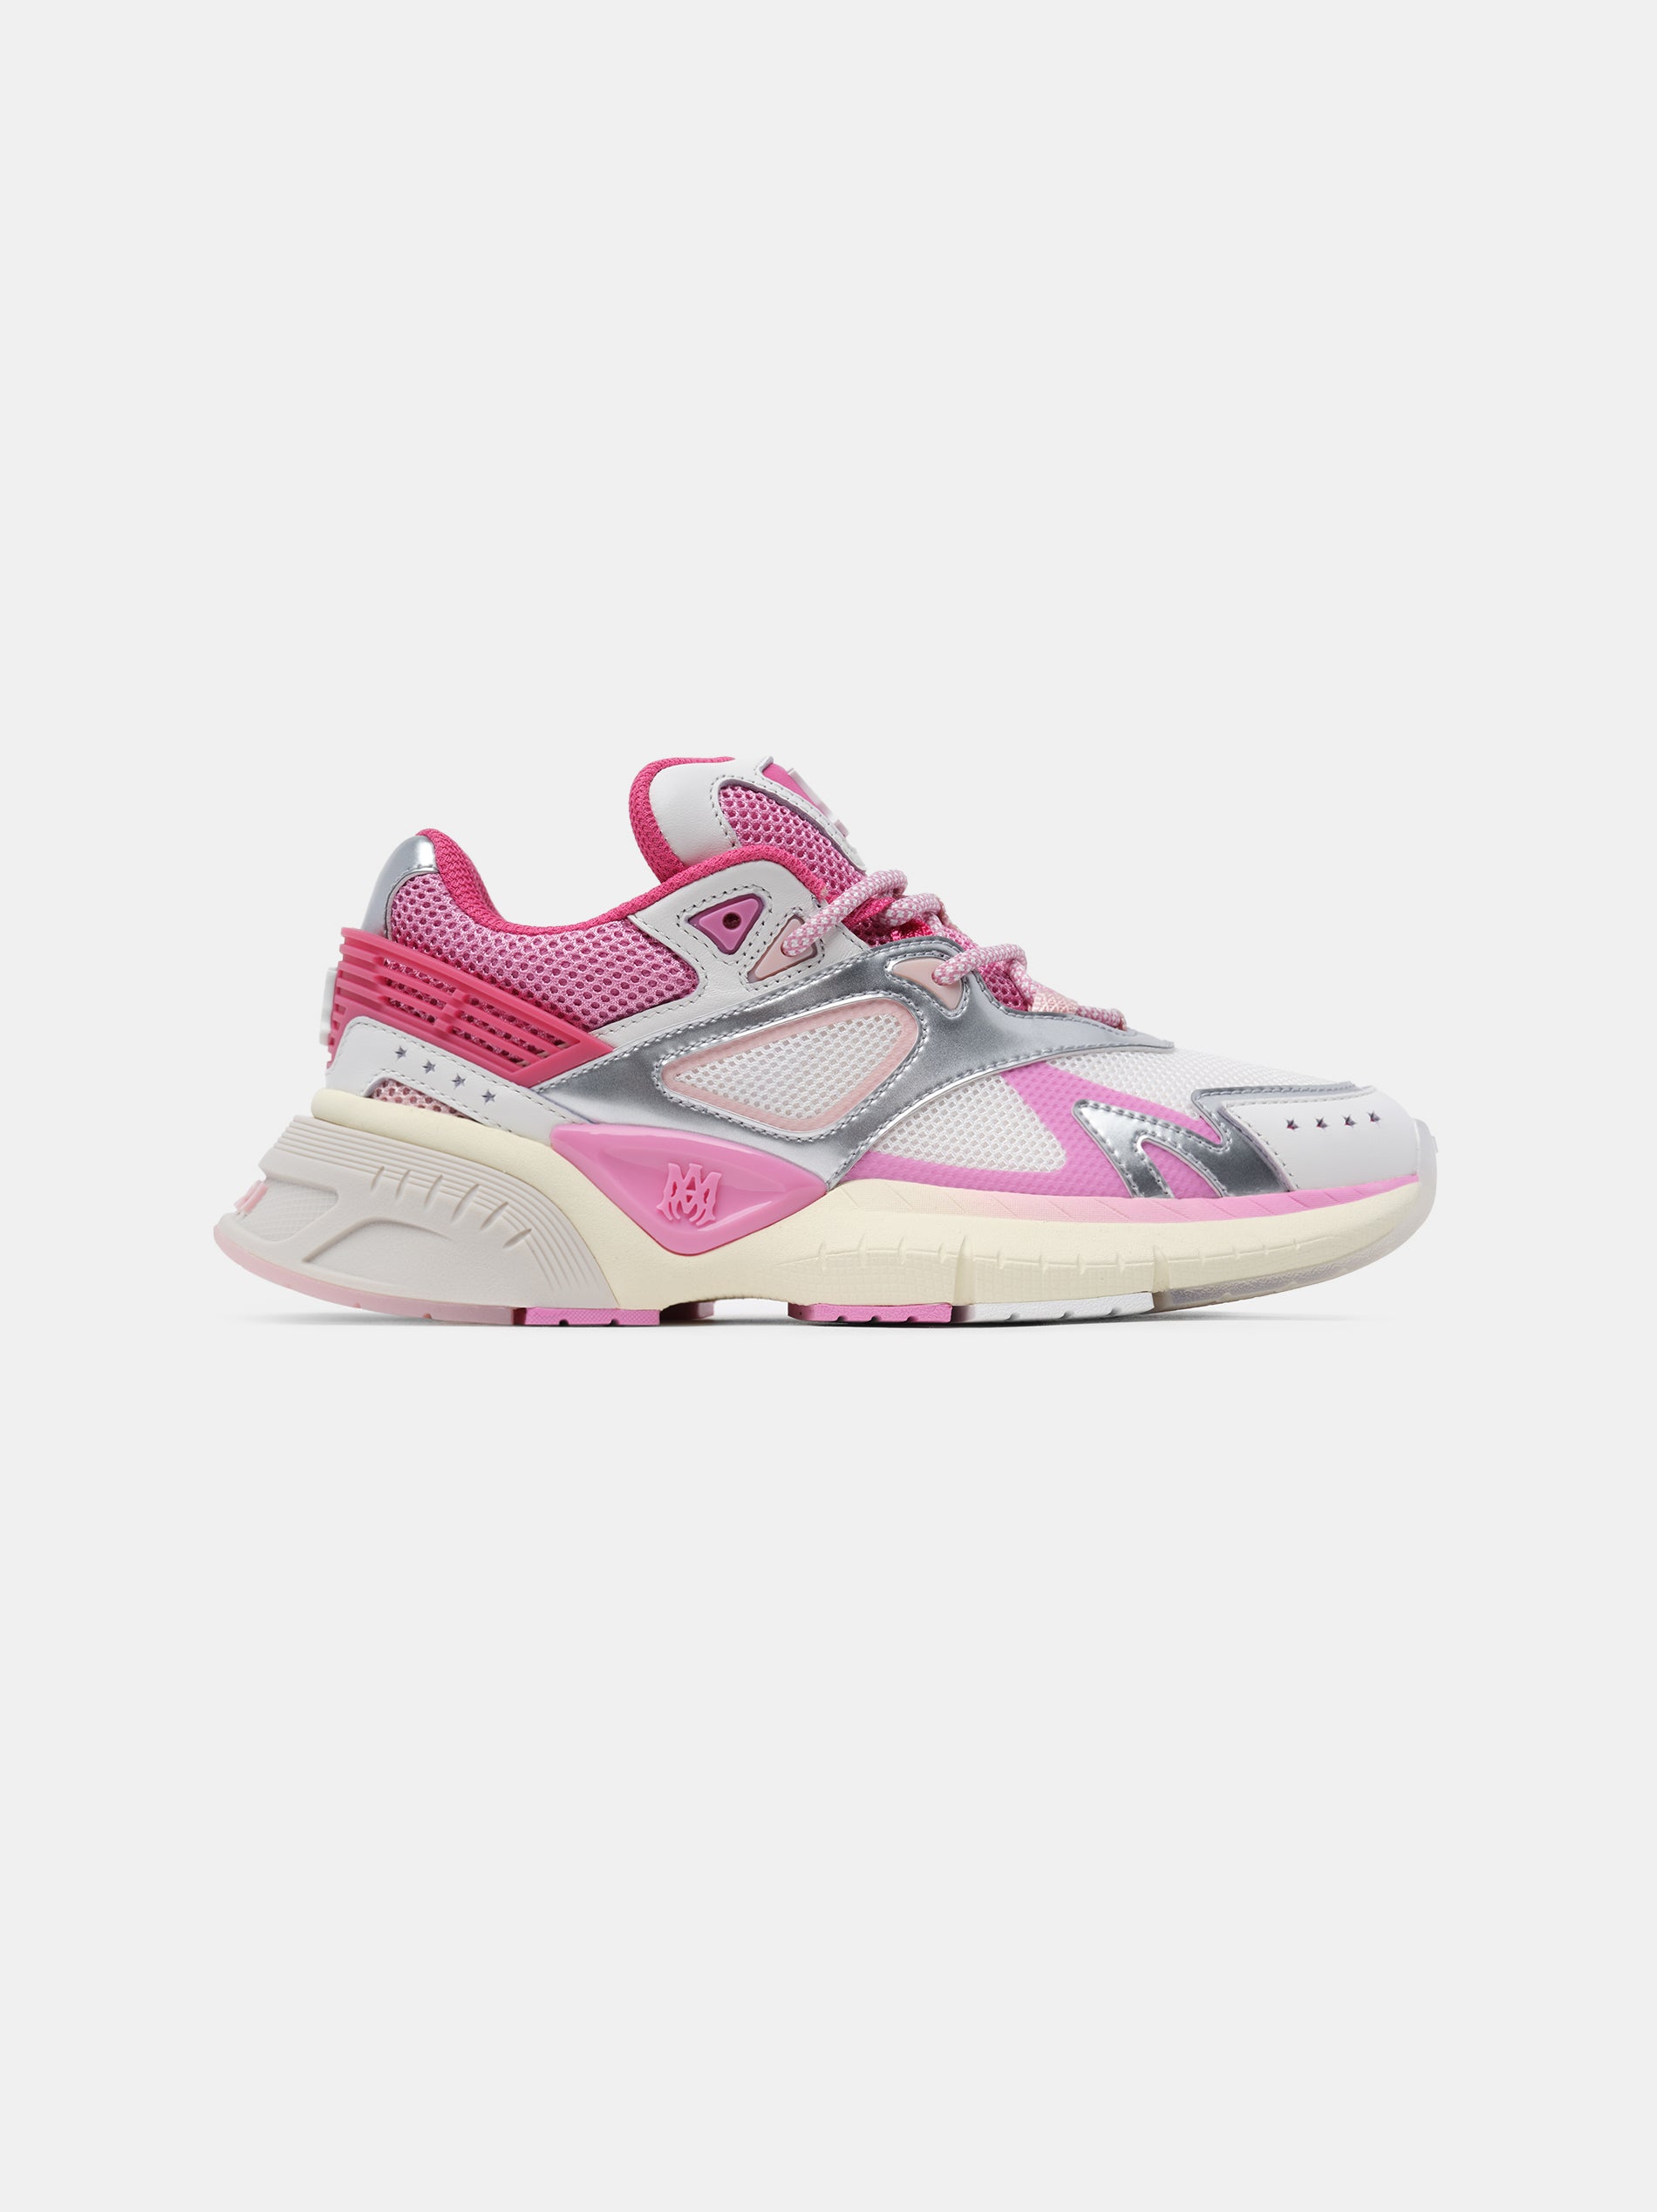 Product WOMEN - WOMEN'S MA RUNNER - Fuchsia Pink White Silver featured image